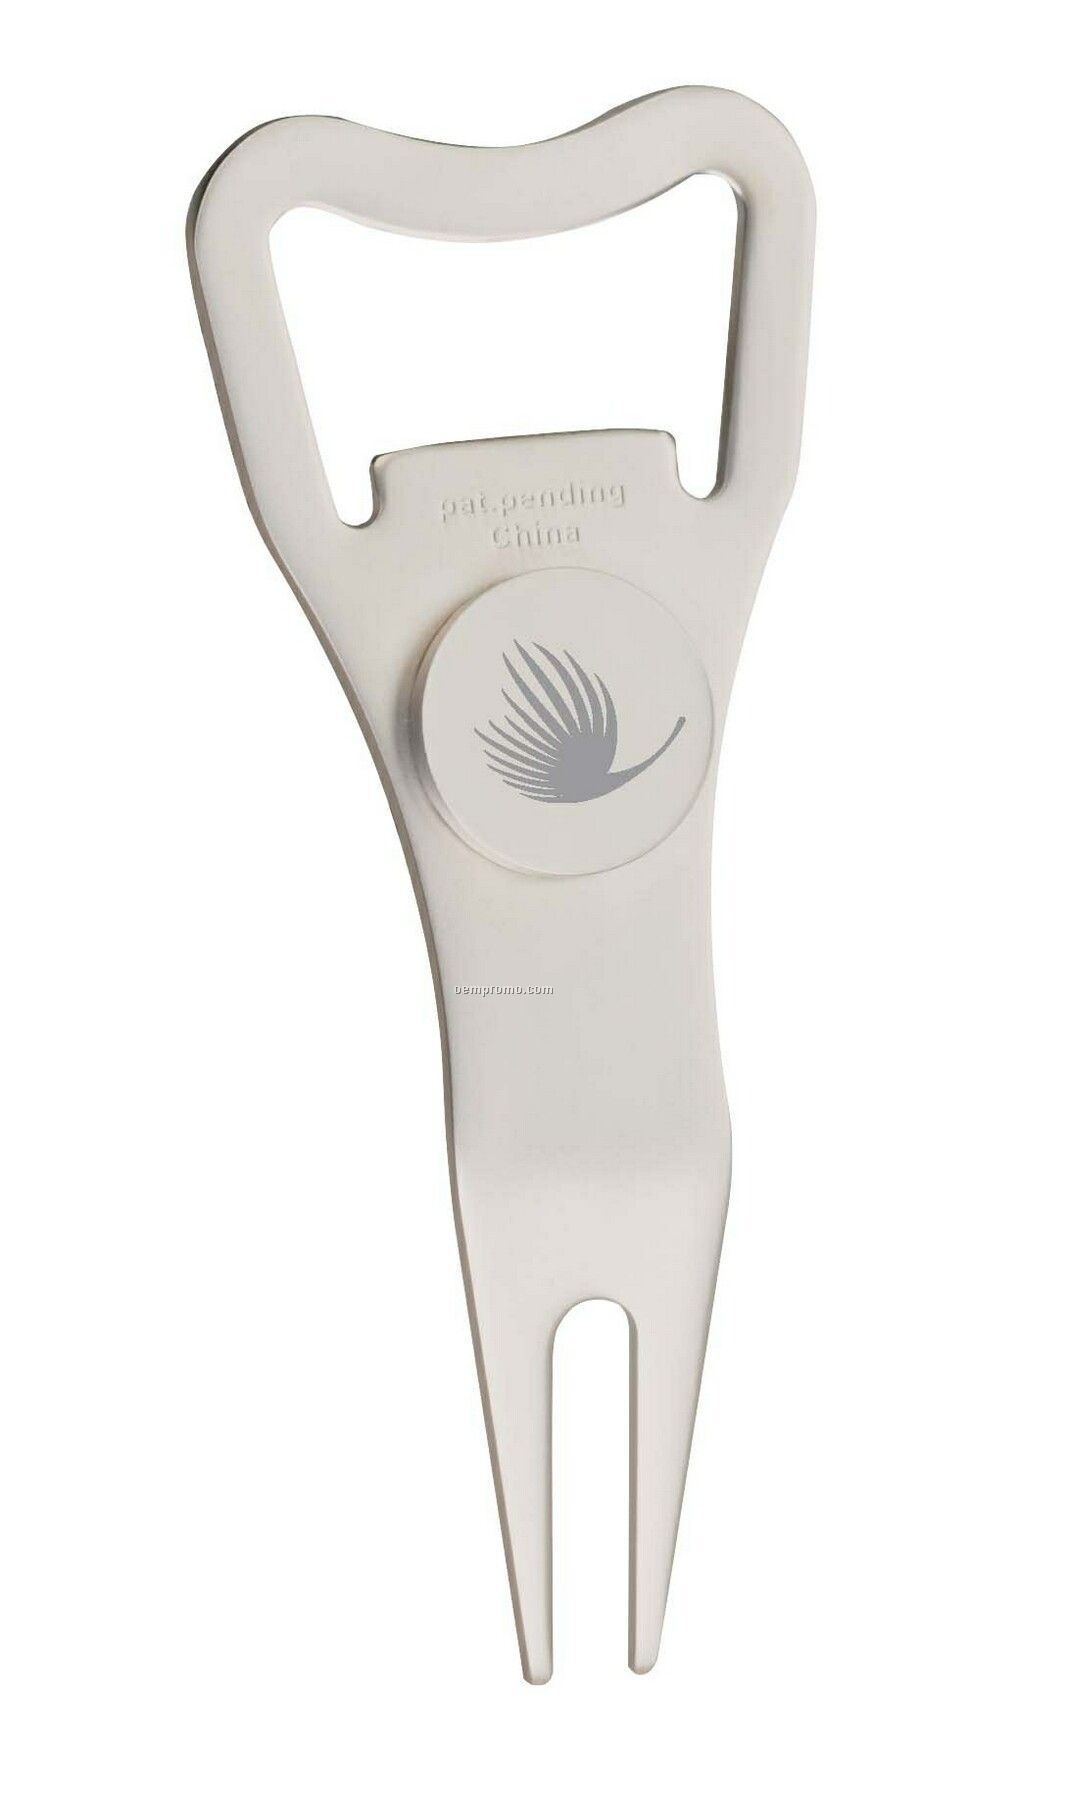 Tee Off Silver Divot Tool With Bottle Opener & Magnetic Ball Marker